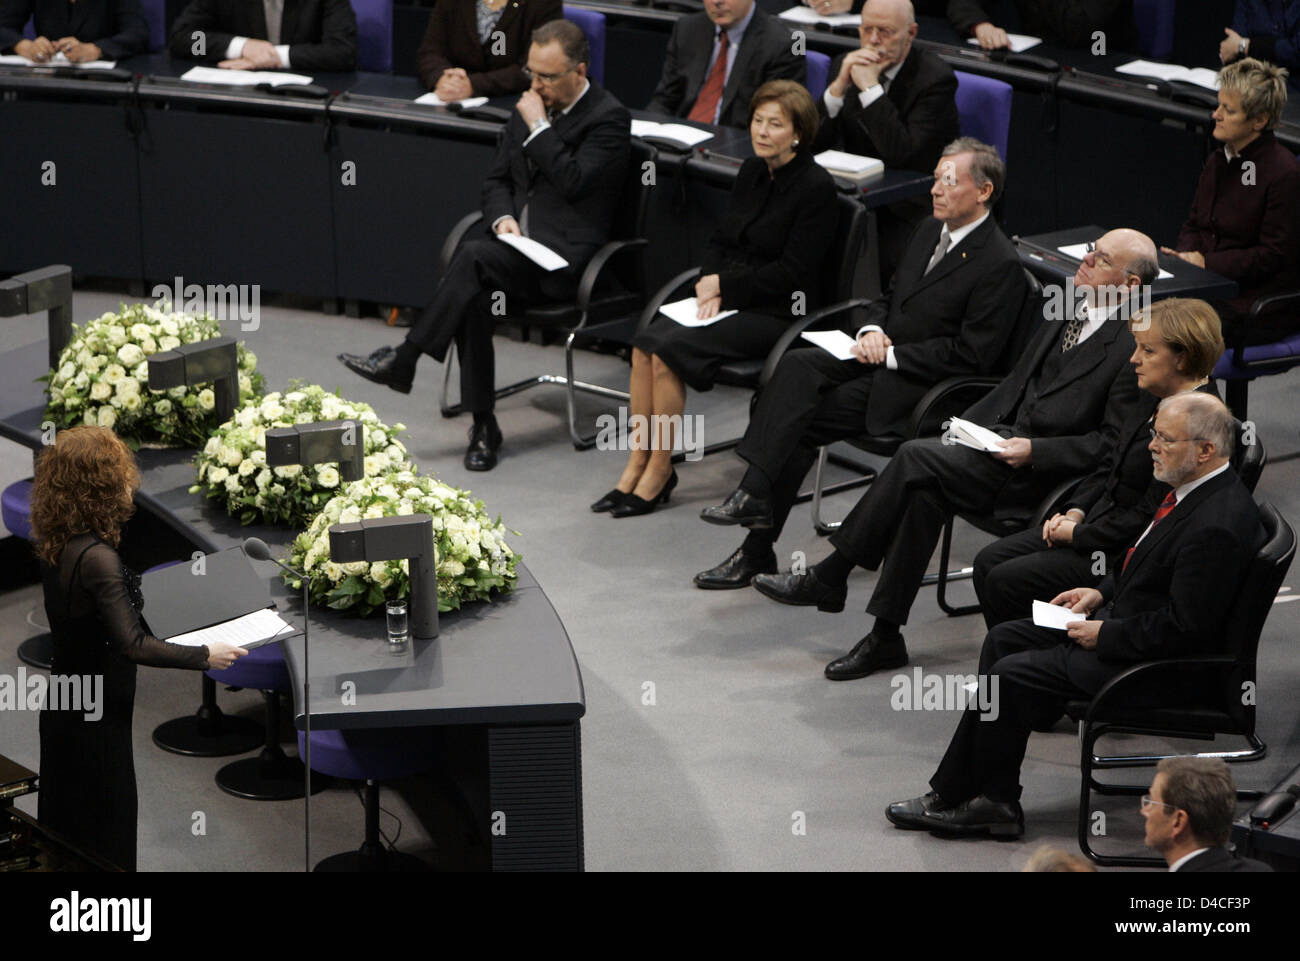 Avitall Gerstetter (L) sinngs in the presence of (R-L) President of the German Federal Coucil Harald Ringstorff, German Chancellor Angela Merkel,  President of the German Bundestag Norbert Lammert, German President Horst Koehler and jis wife Eva Luise, and President of the Federal Constitutional Court Hans-Juergen Papier during a commemoration ceremony at the Bundestag in Berlin, 2 Stock Photo